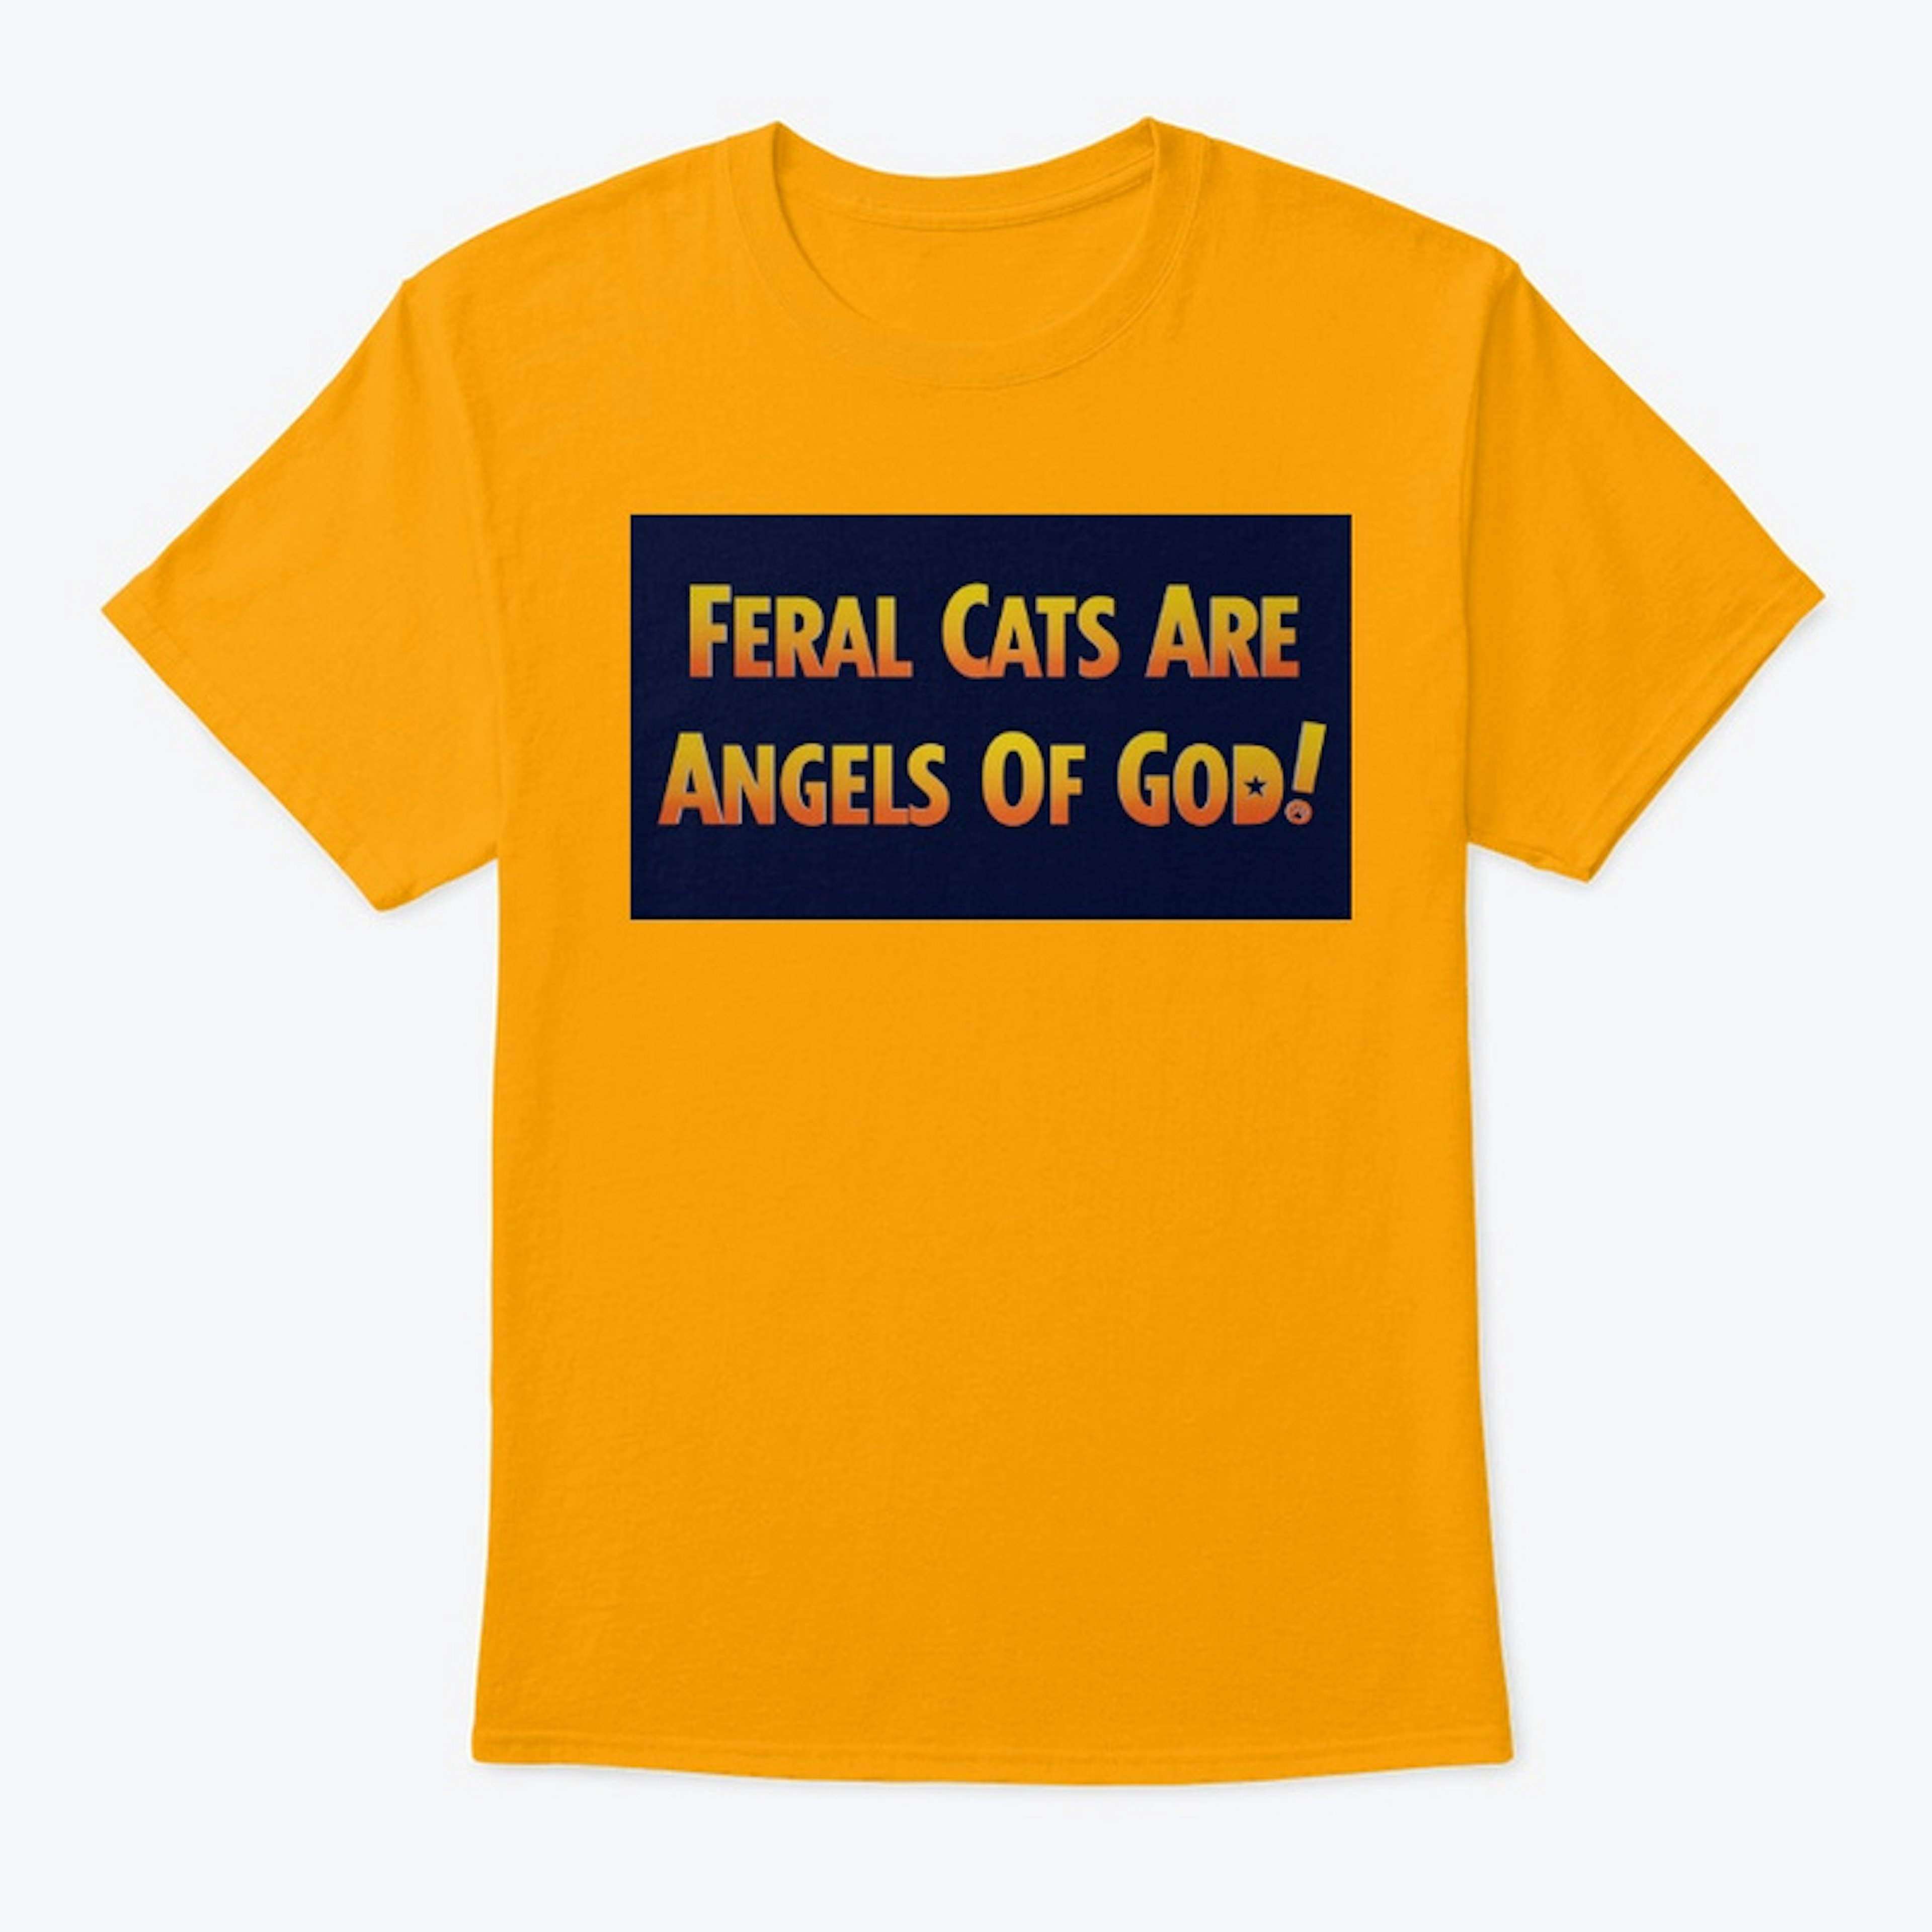 New Feral Cats Branded Merch